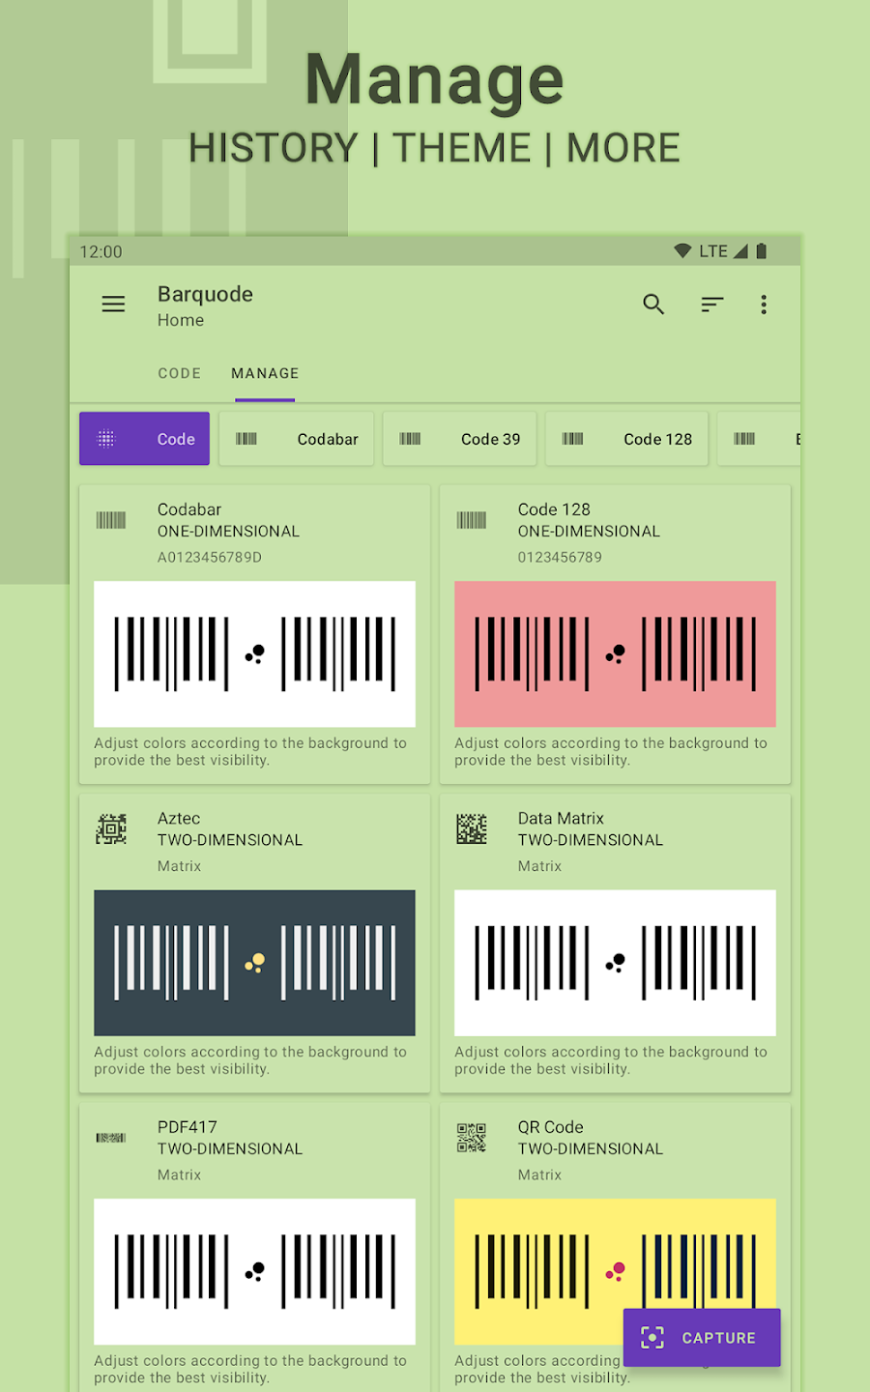 PDF417 barcode generator App For Android